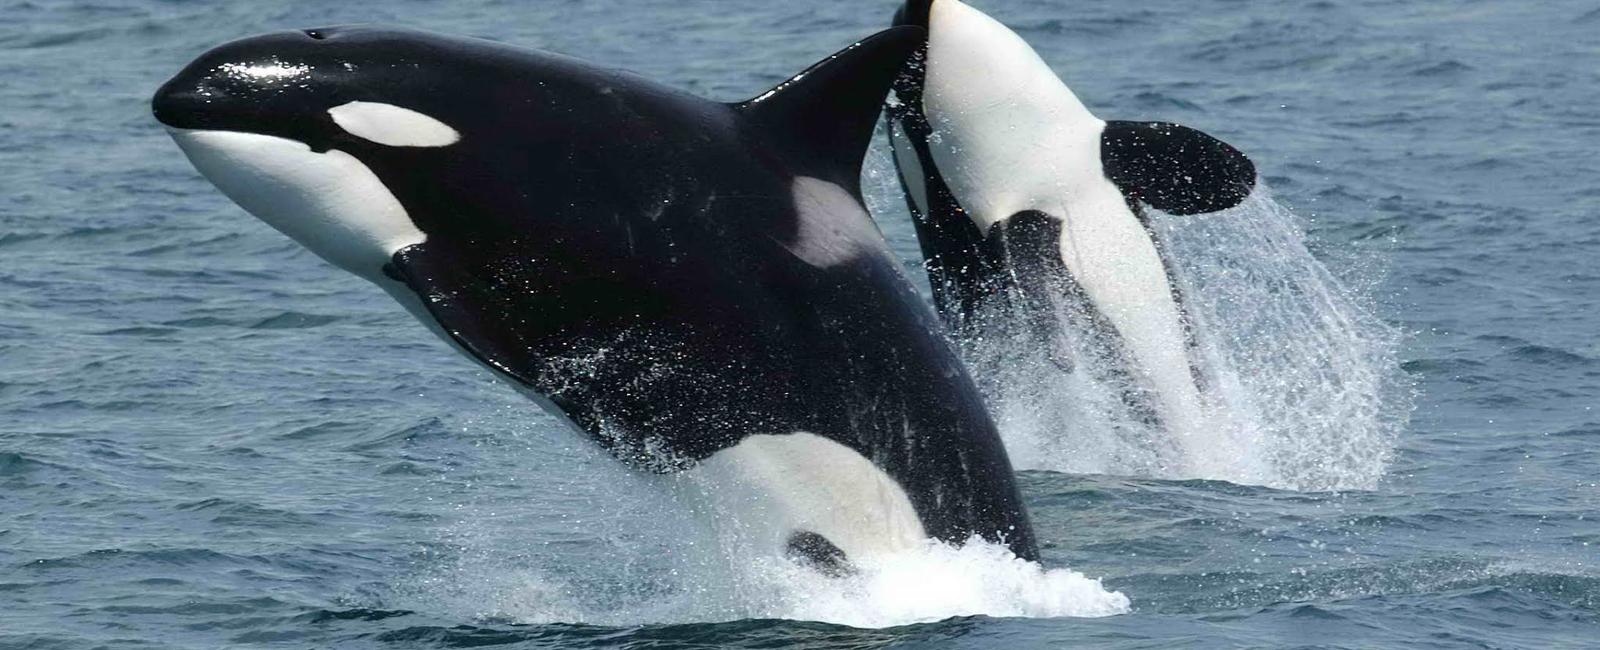 Despite its name the killer whale orca is actually a type of dolphin